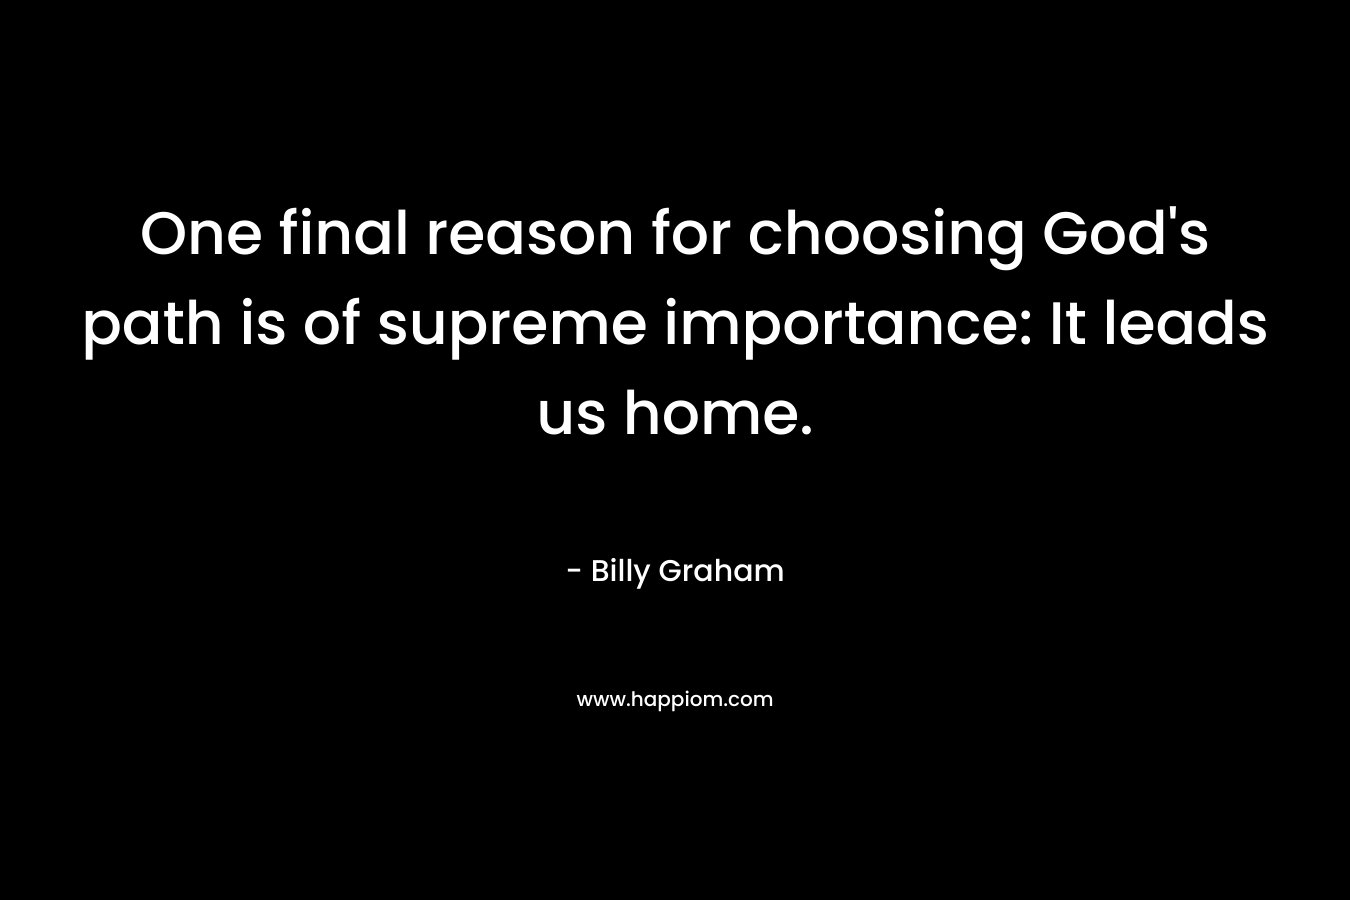 One final reason for choosing God’s path is of supreme importance: It leads us home. – Billy Graham